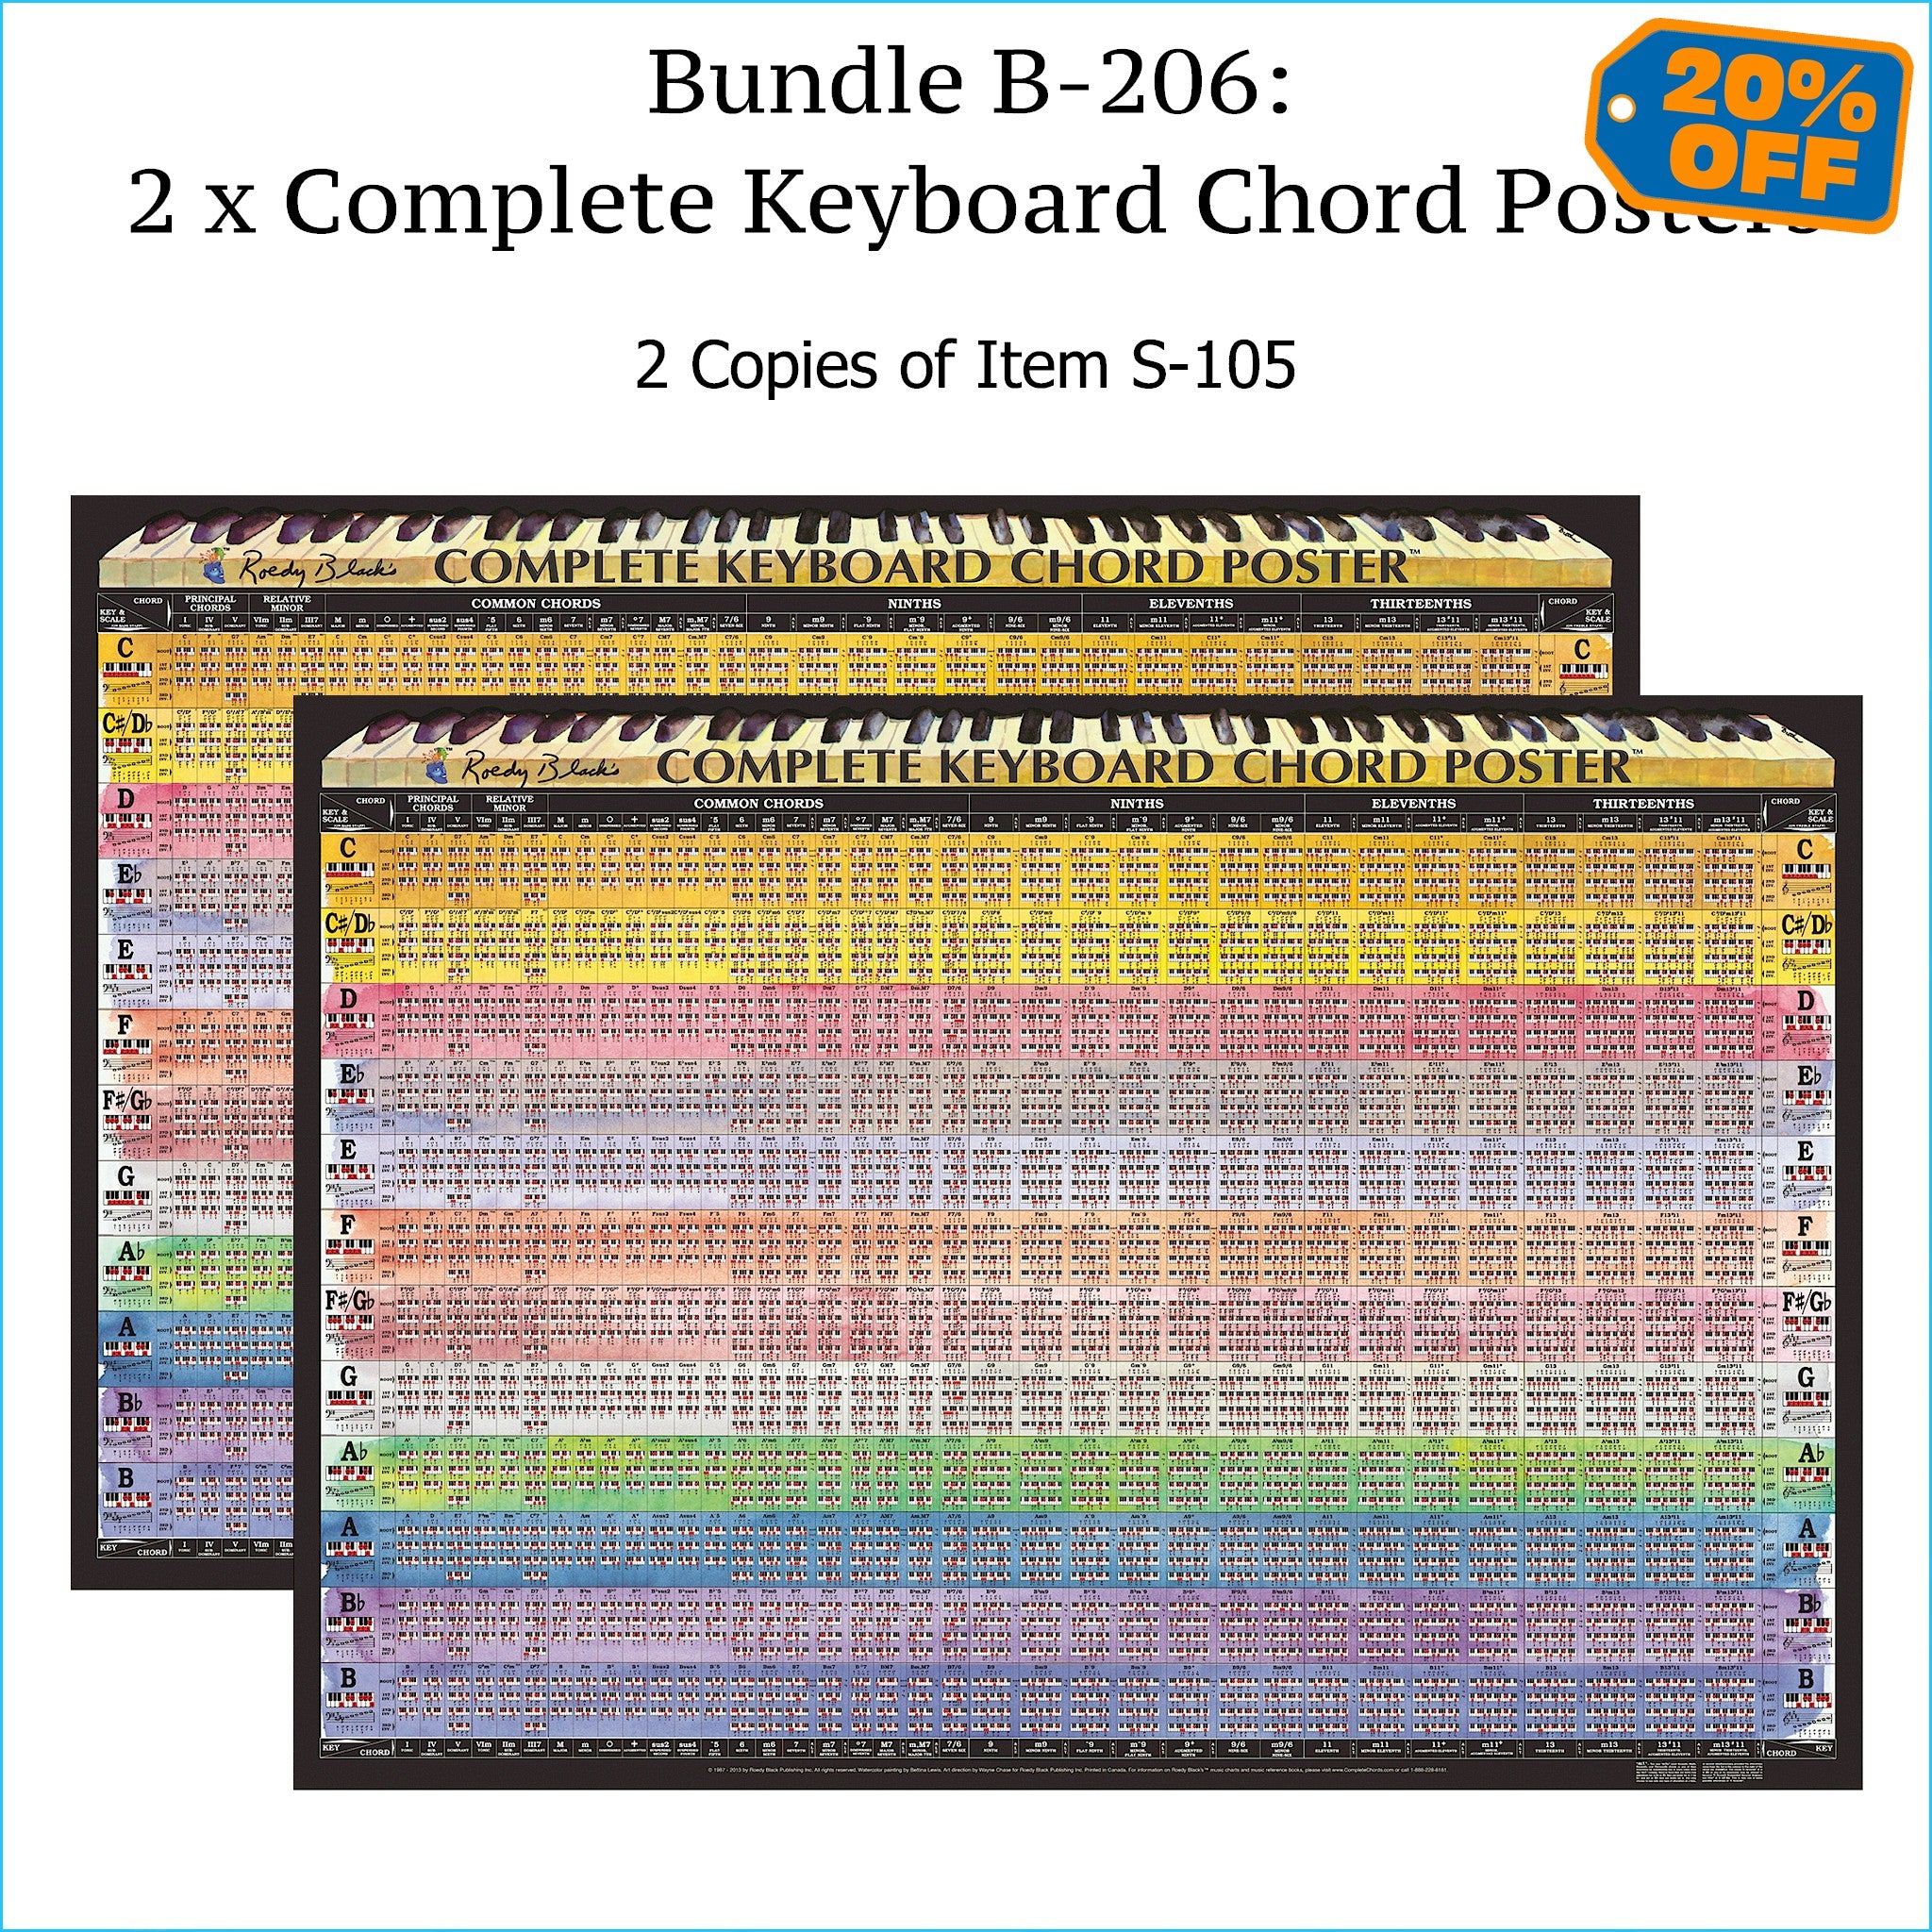 Bundle B-206 (TWO Items): "Complete Keyboard Chord Poster", 2 Copies. World's ONLY Wall Poster of Every Piano / Keyboard Chord. It's Laminated. FREE SHIPPING – USA & Canada.